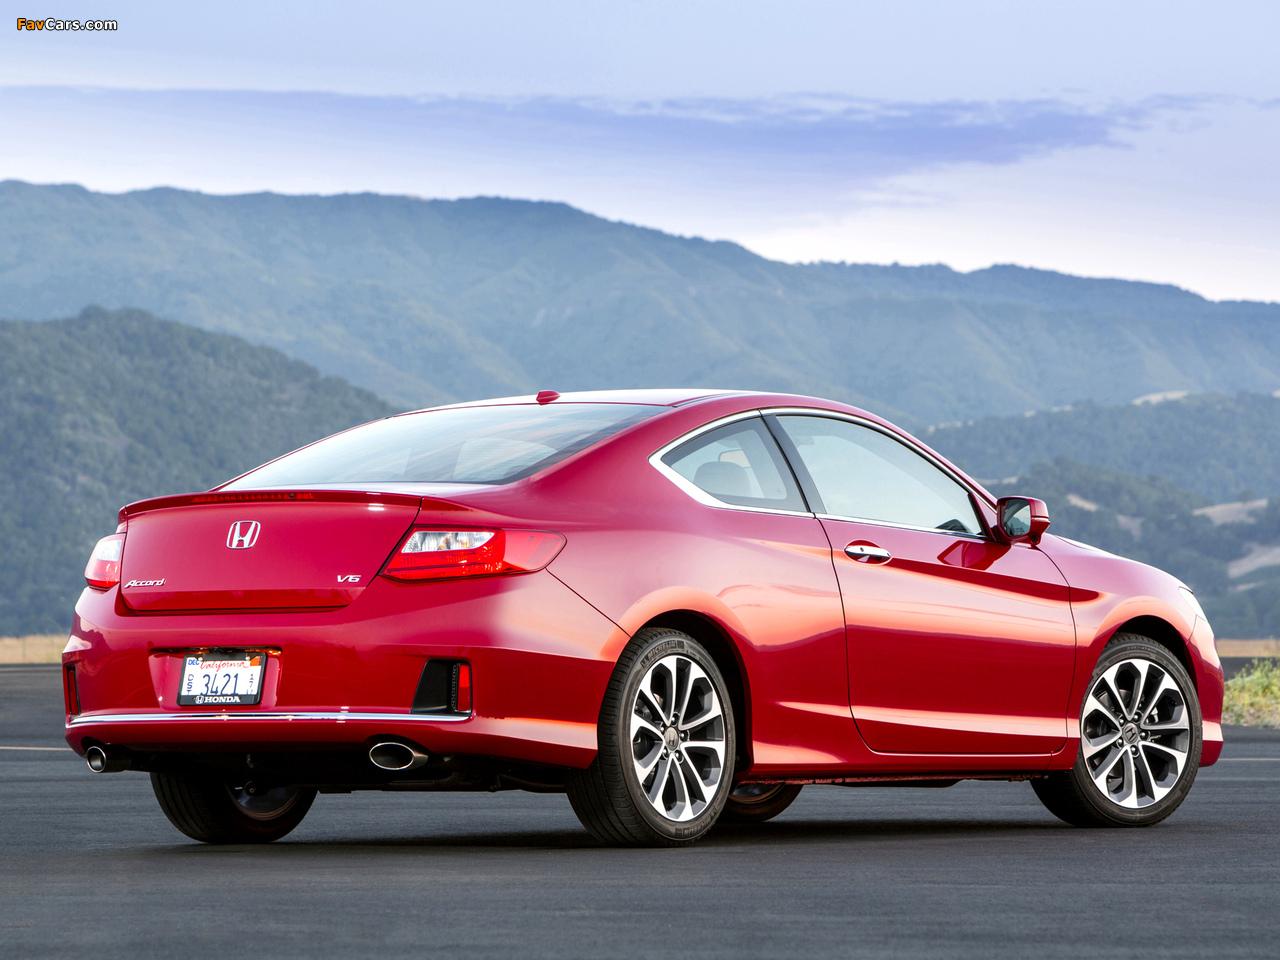 Honda Accord EX-L V6 Coupe 2012 pictures (1280 x 960)